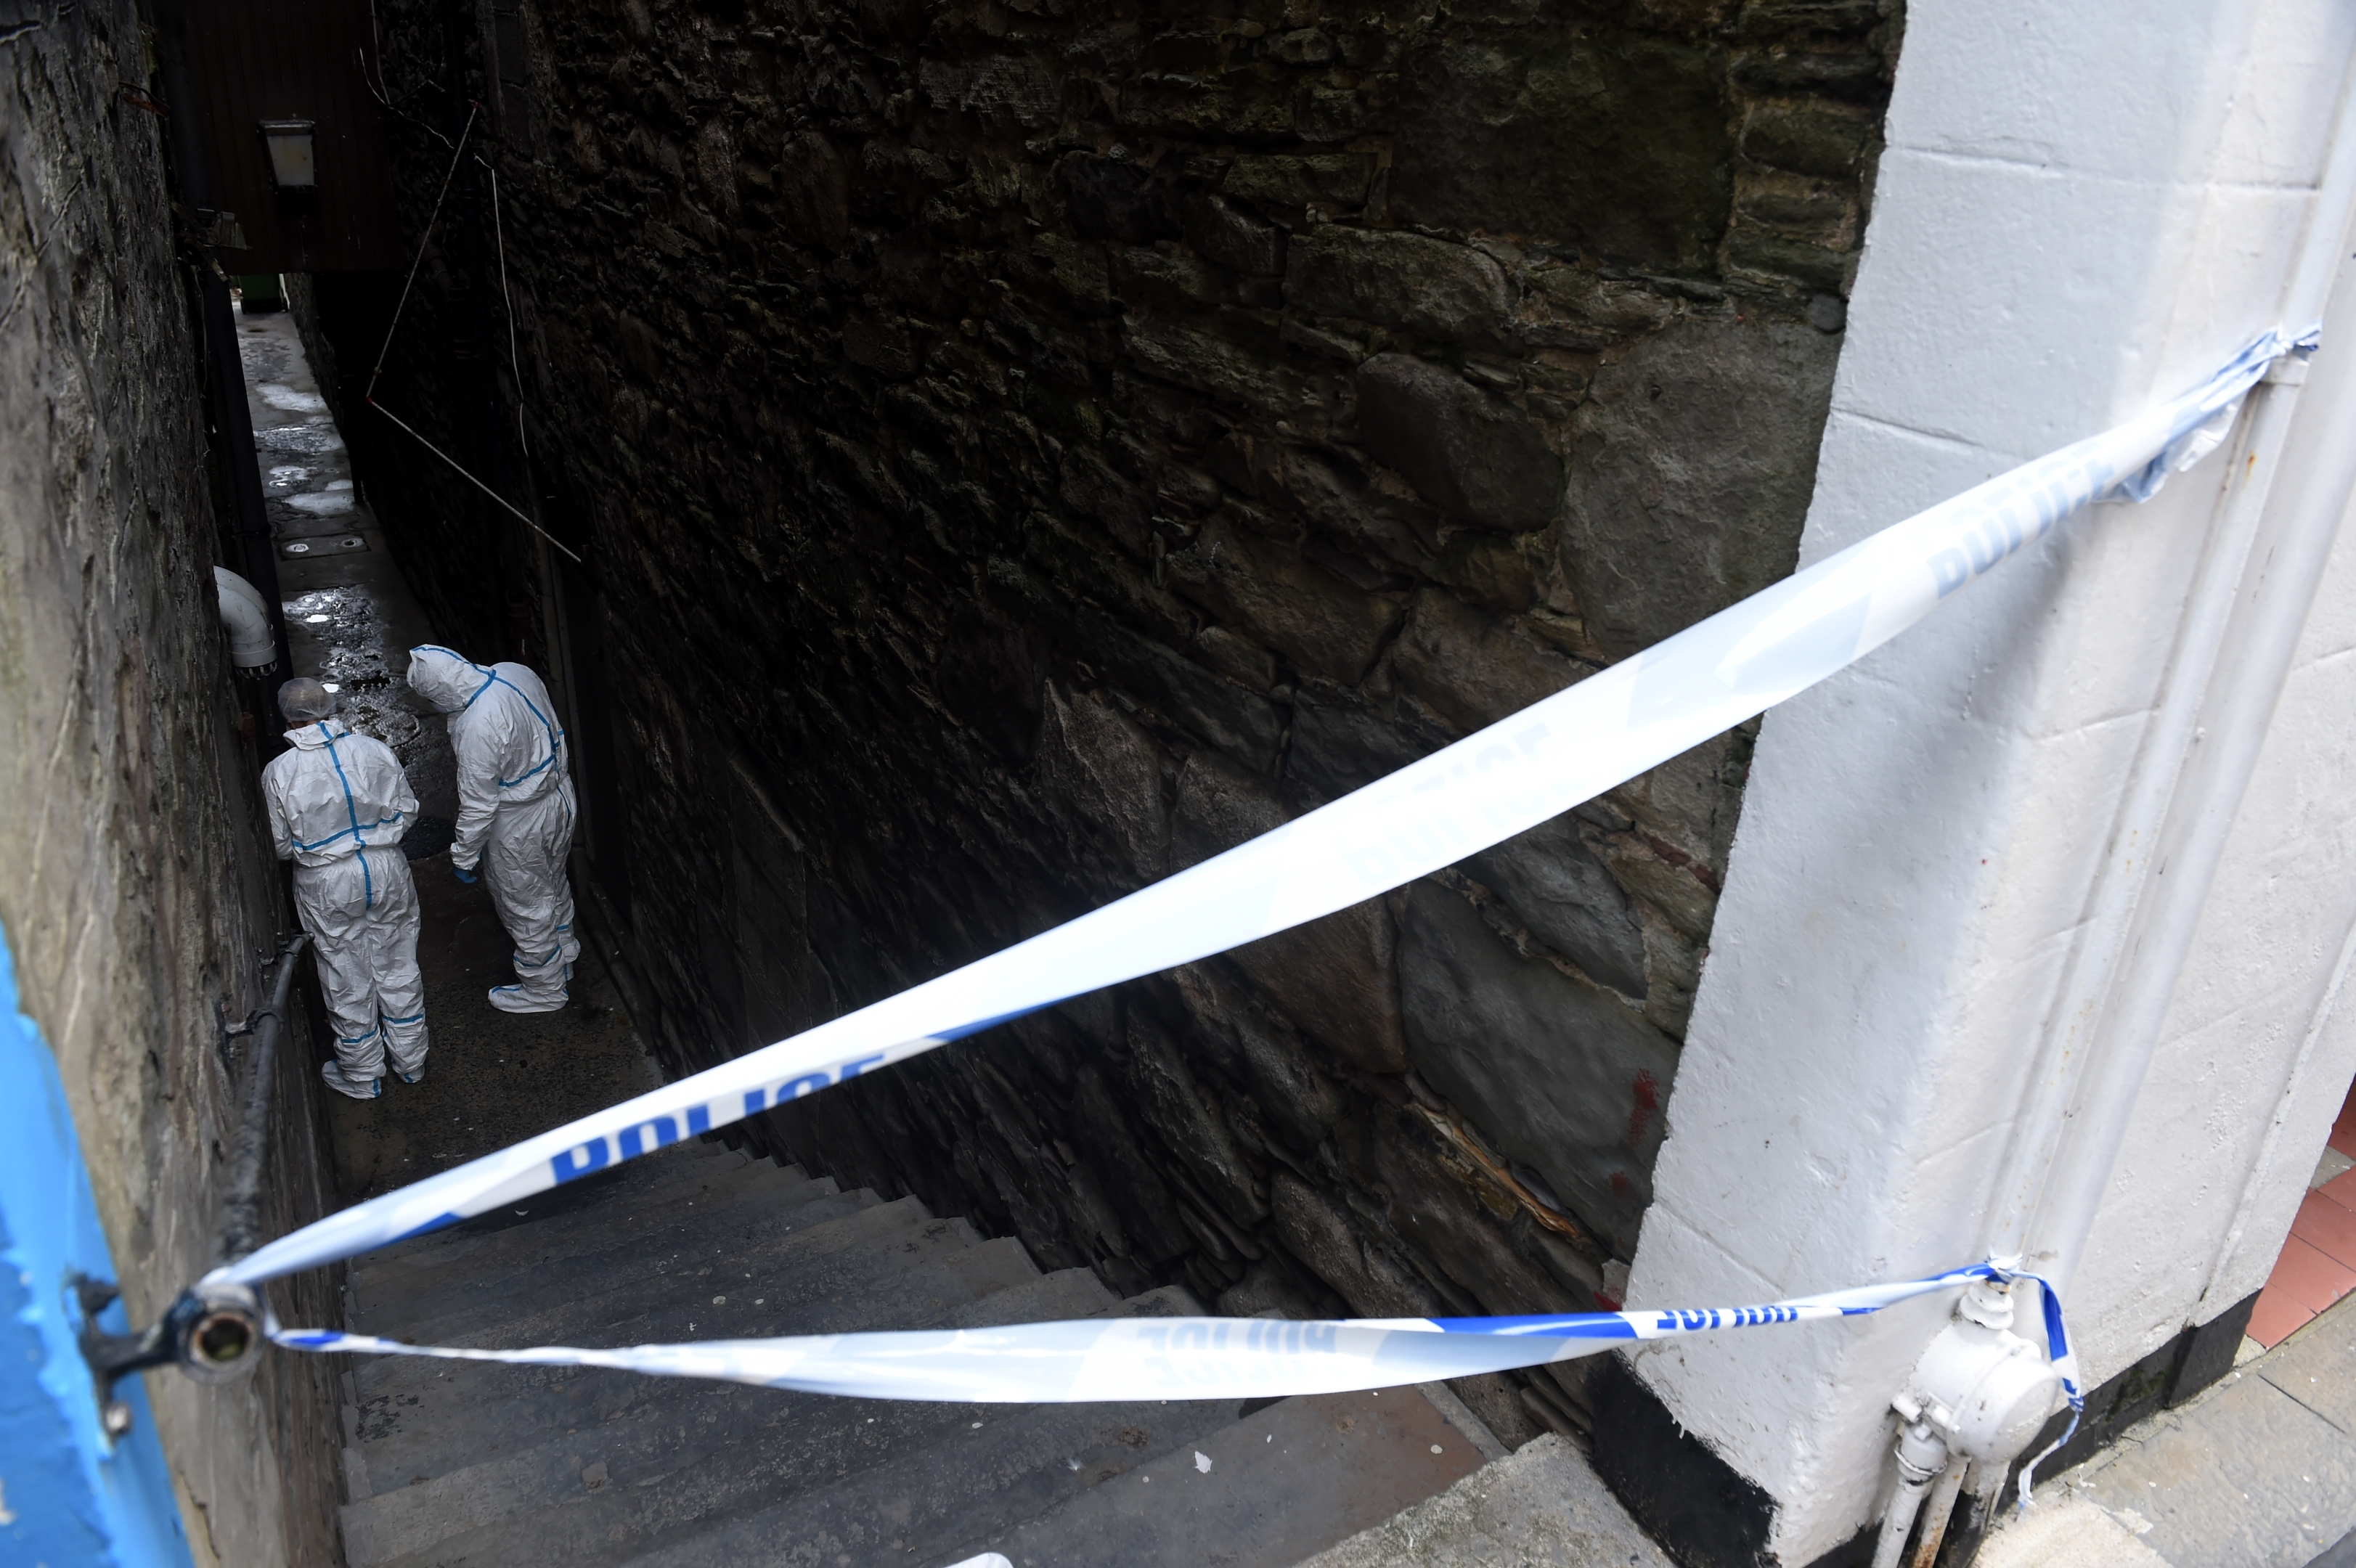 Police at the scene of a sexual assault at Mulleys steps, near Commercial Street in Lerwick, Shetland.